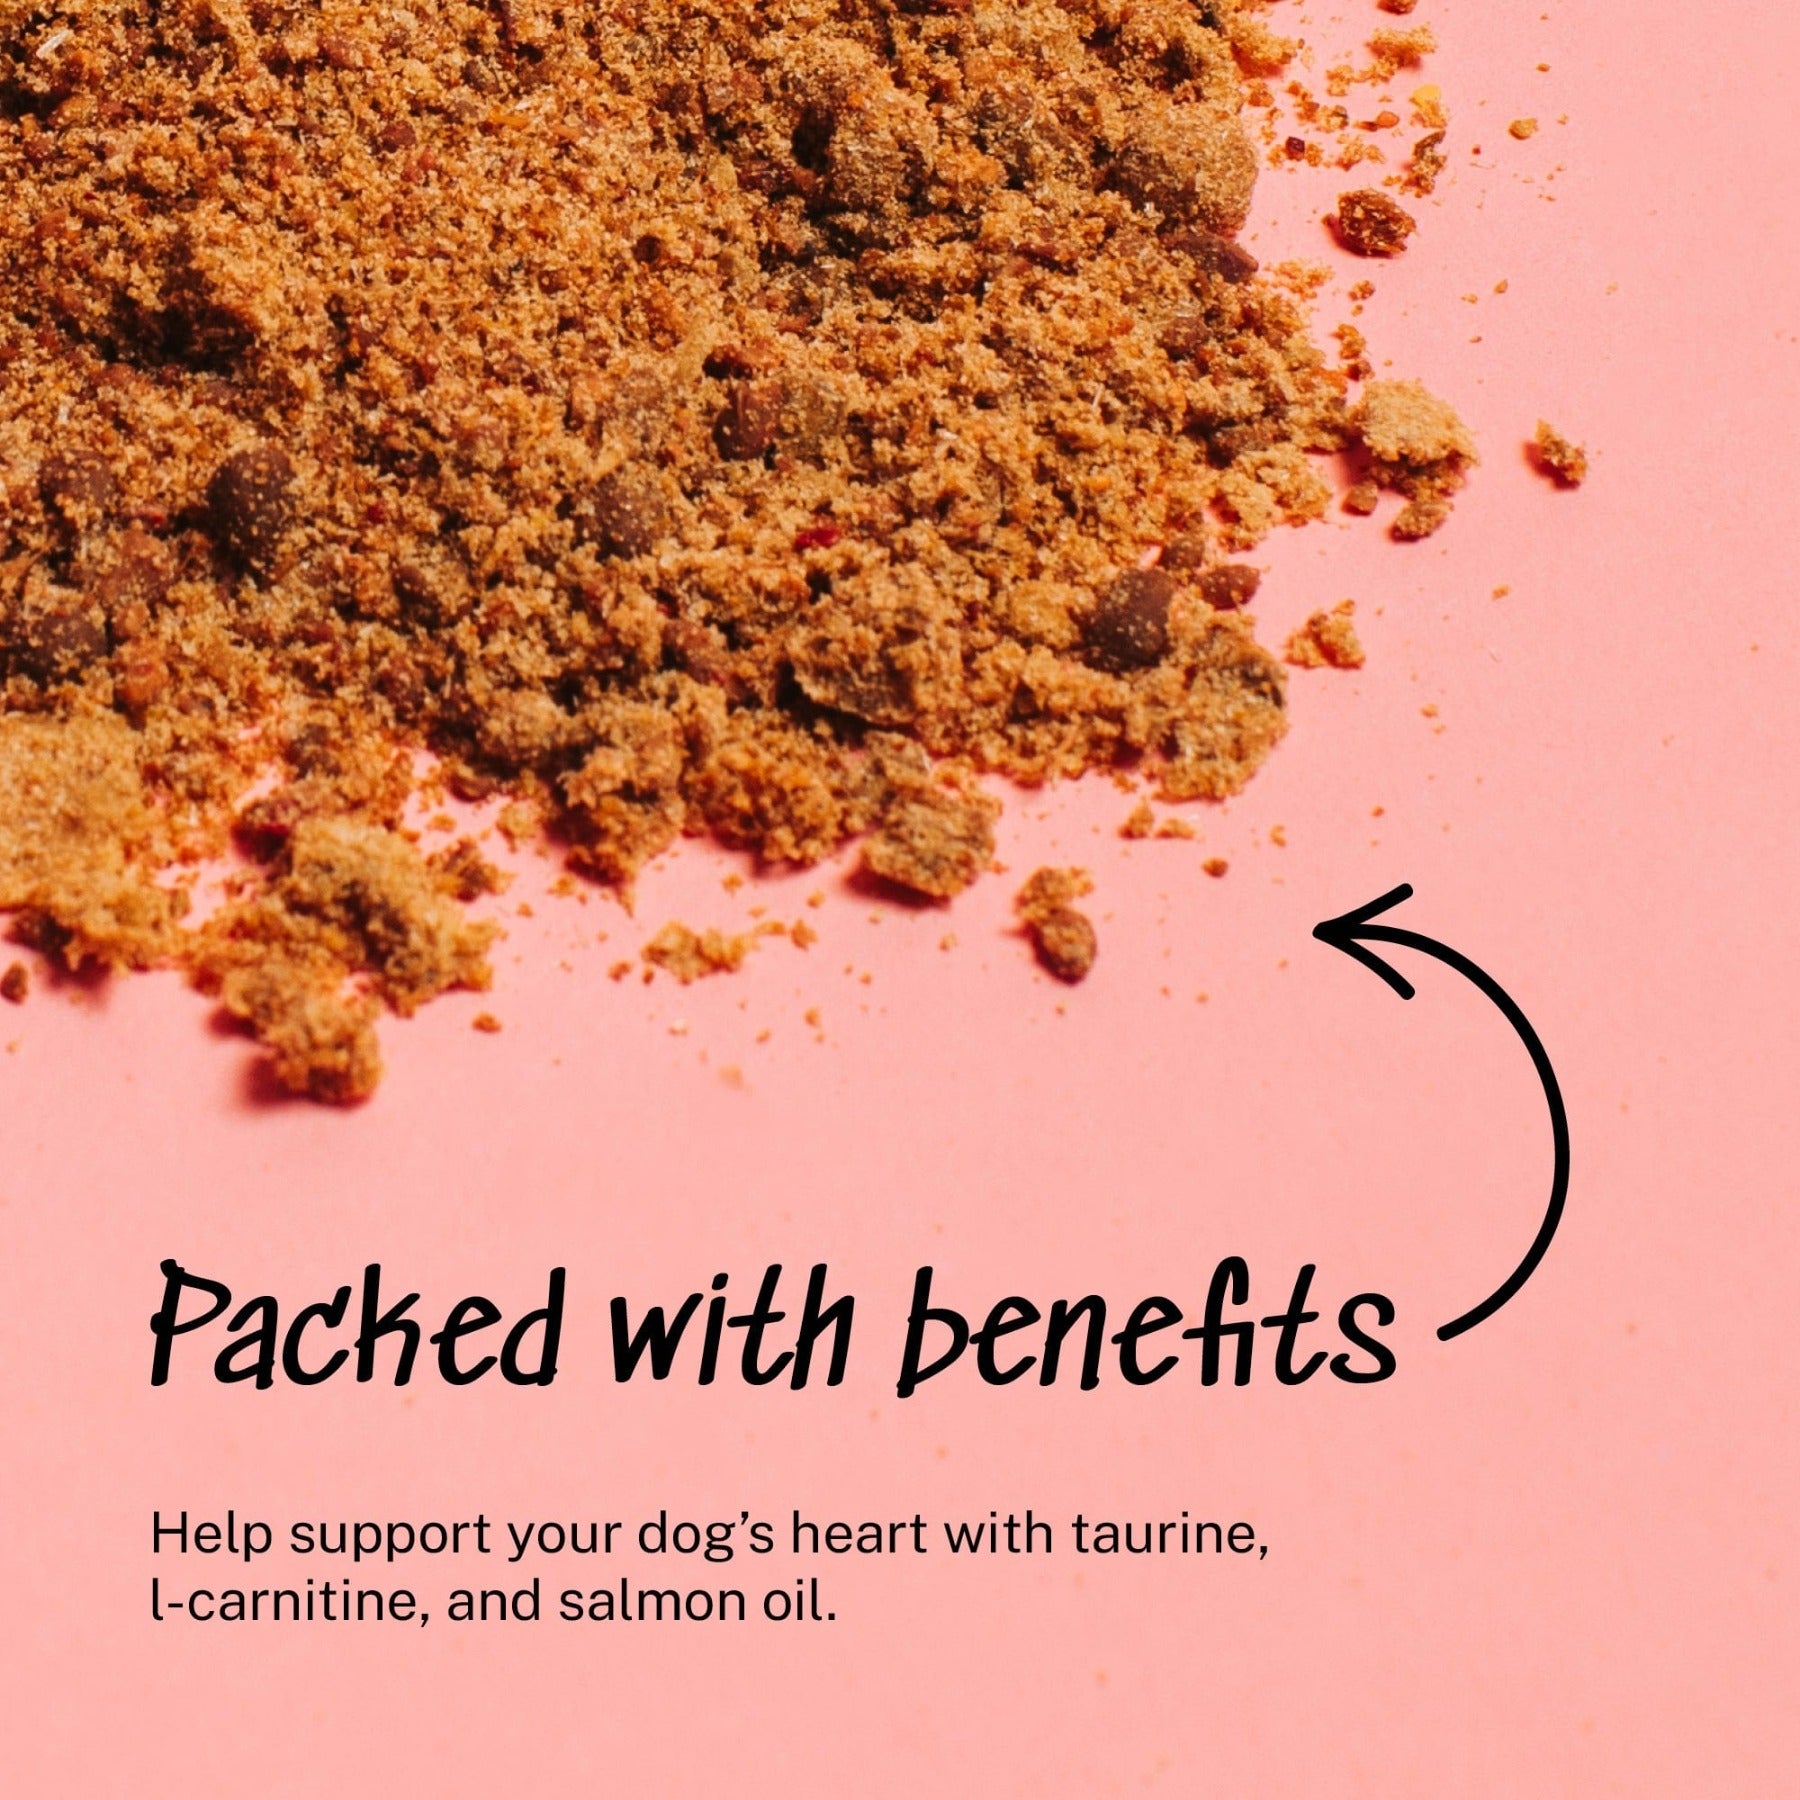 Packed with benefits - Help support your dog’s heart with taurine,  l-carnitine, and salmon oil.